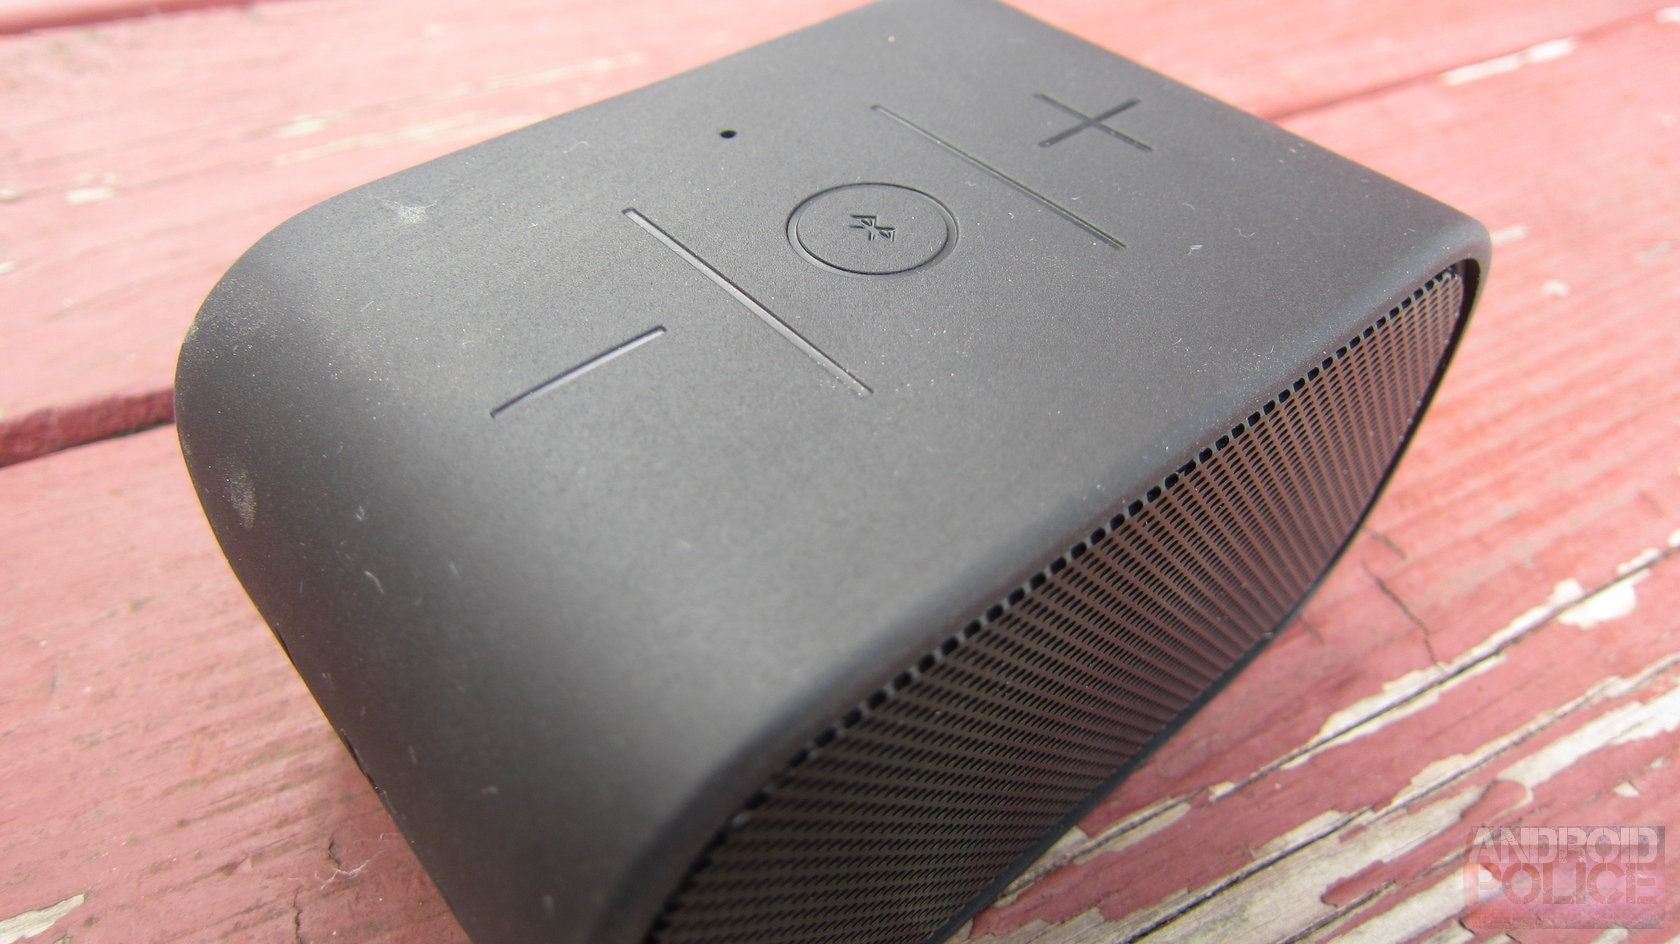 Updated] Logitech UE Boombox And Mobile Boombox Review: Two